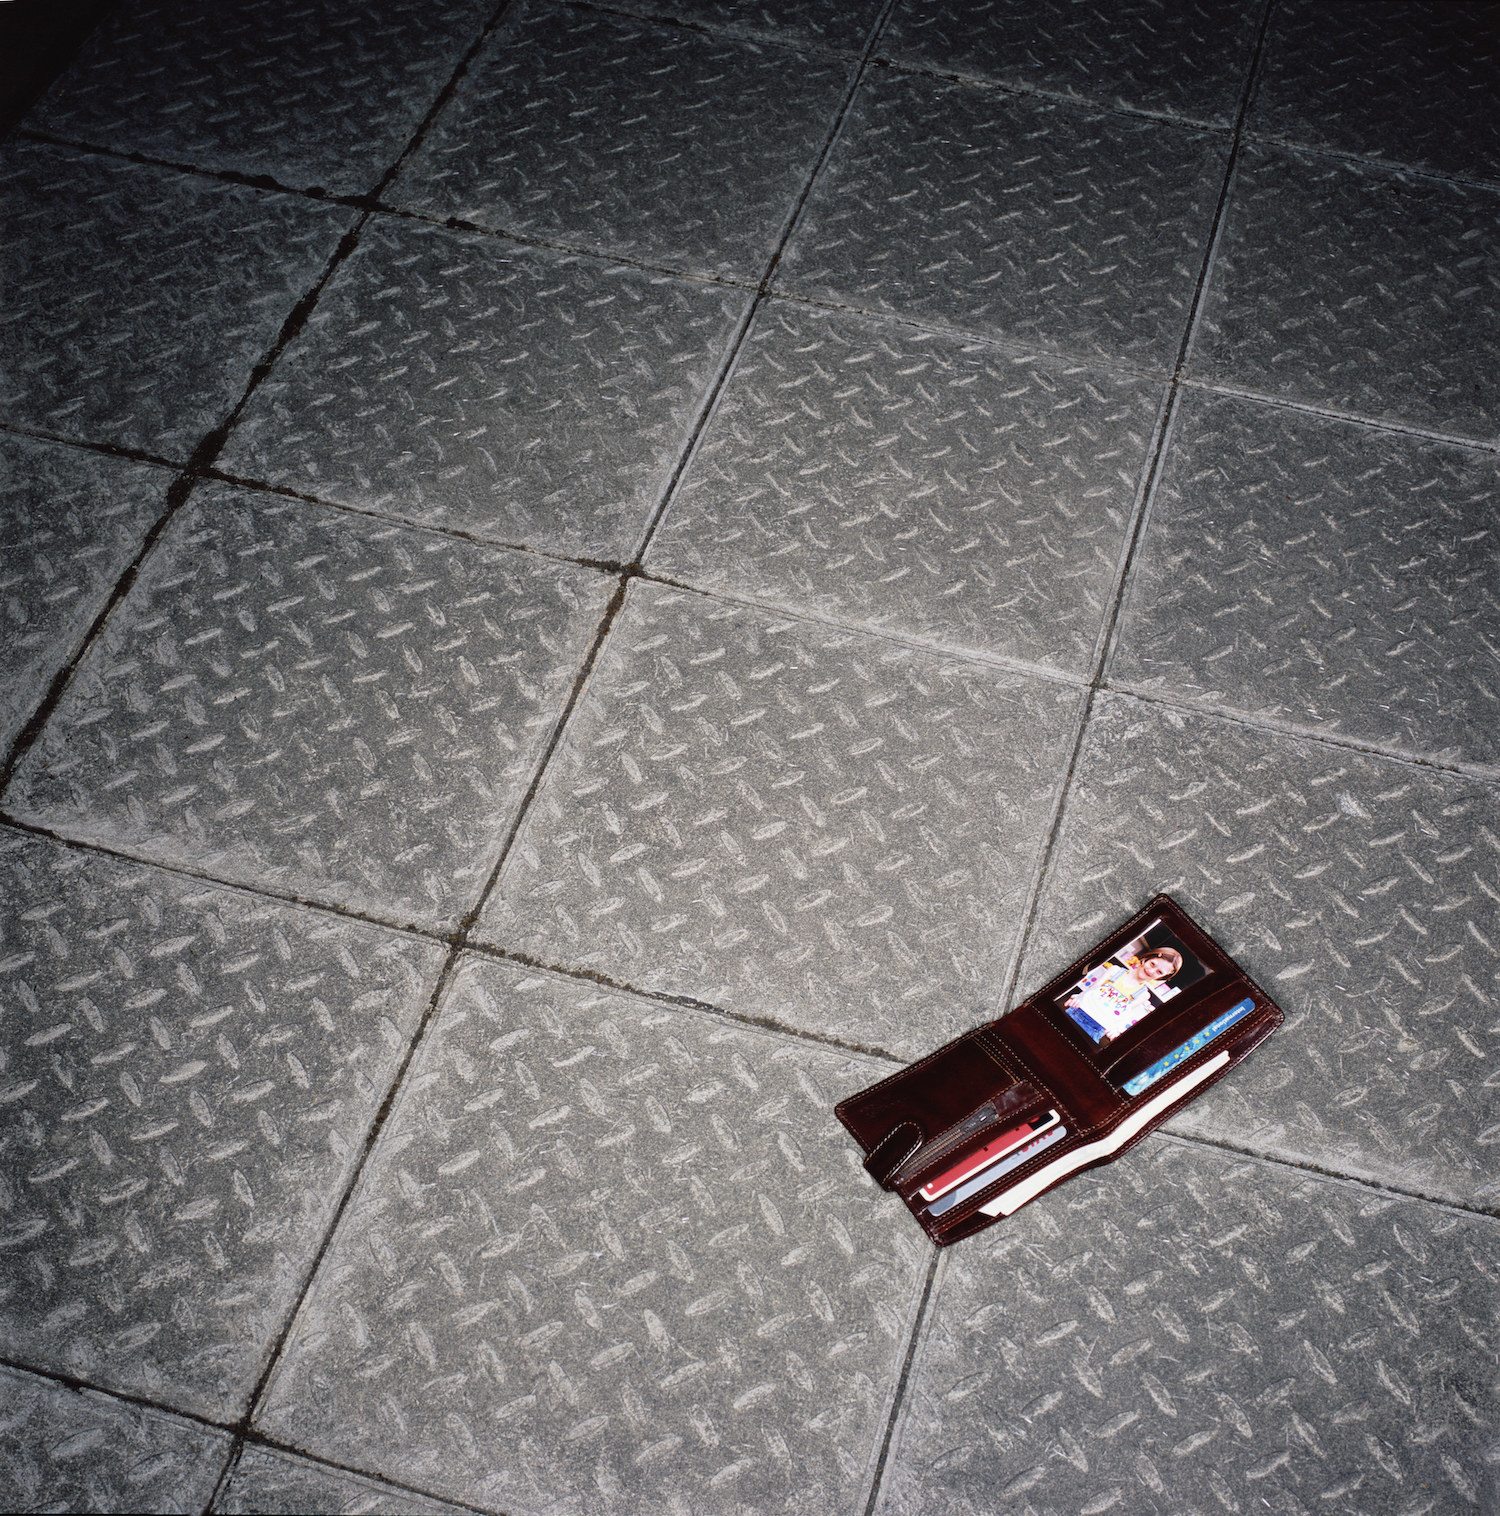 A wallet on the floor